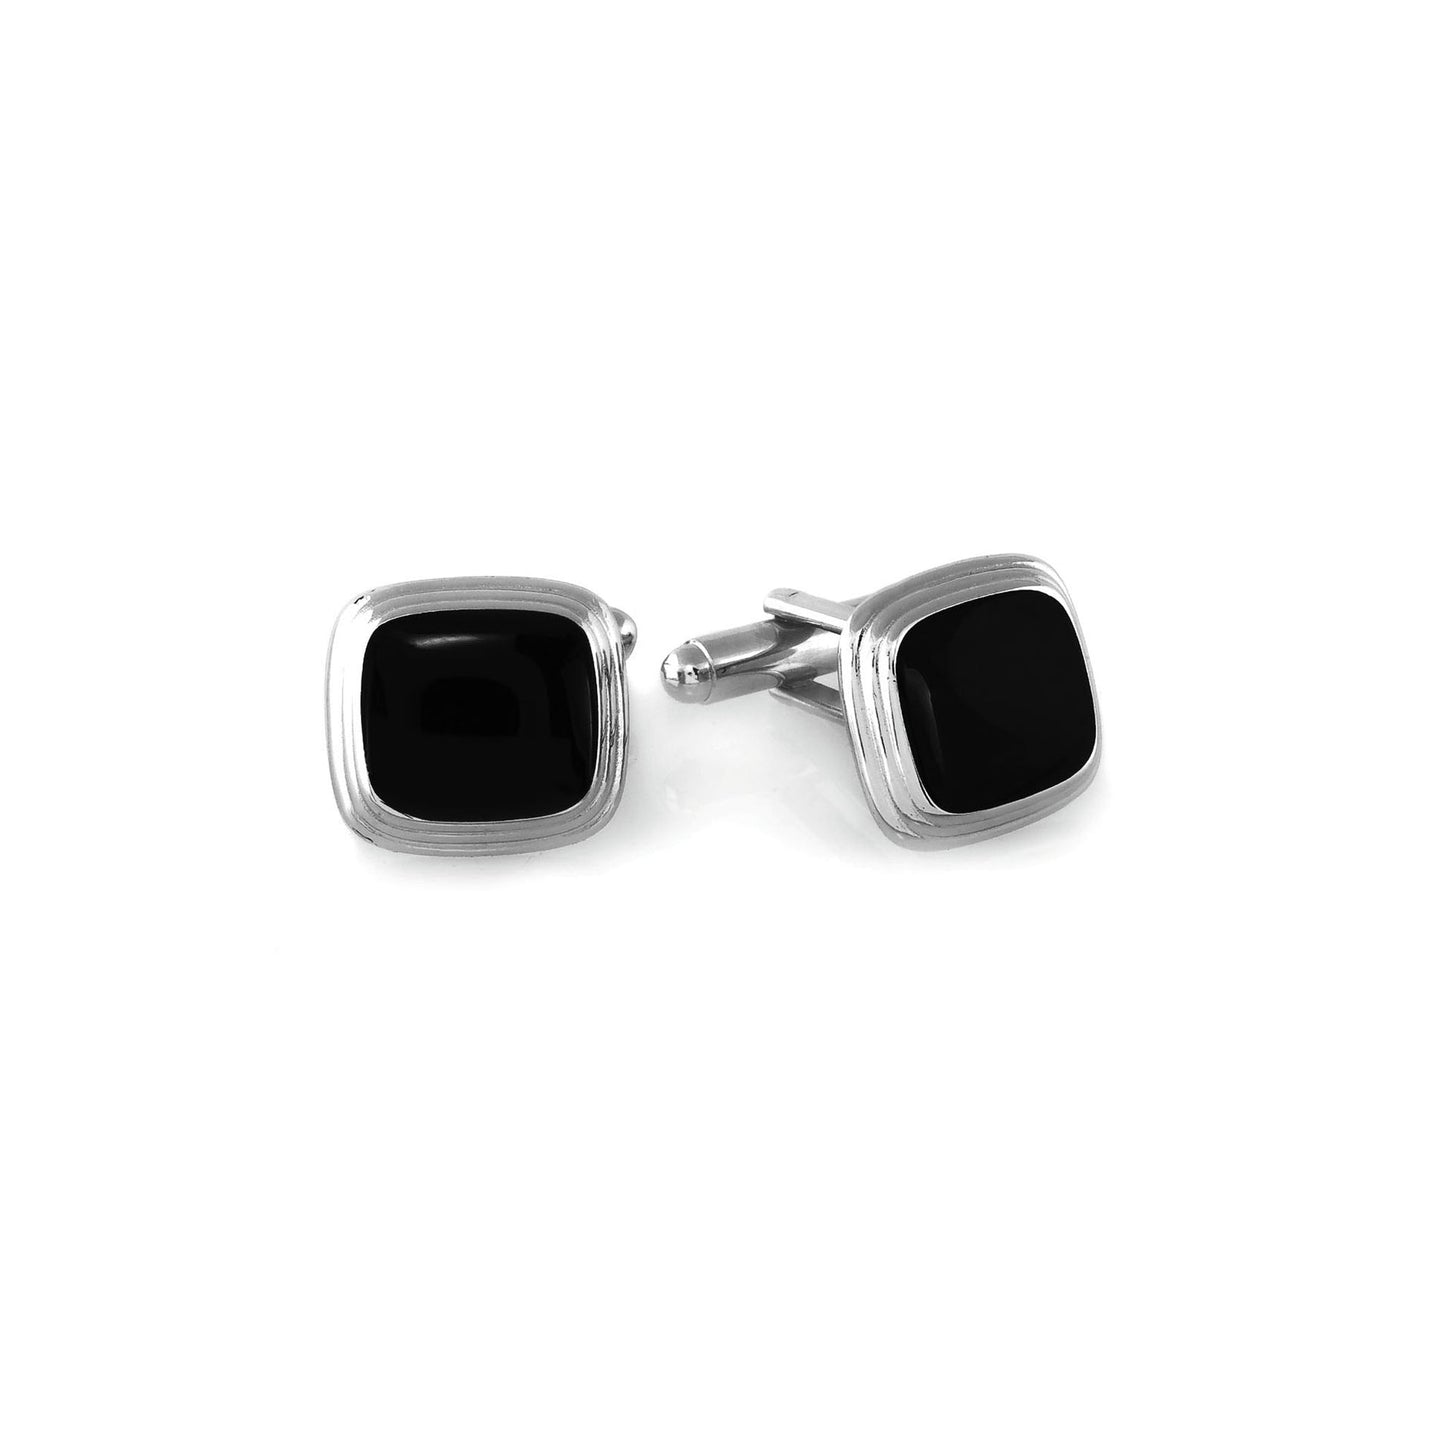 A black lacquer cushion cufflinks displayed on a neutral white background.